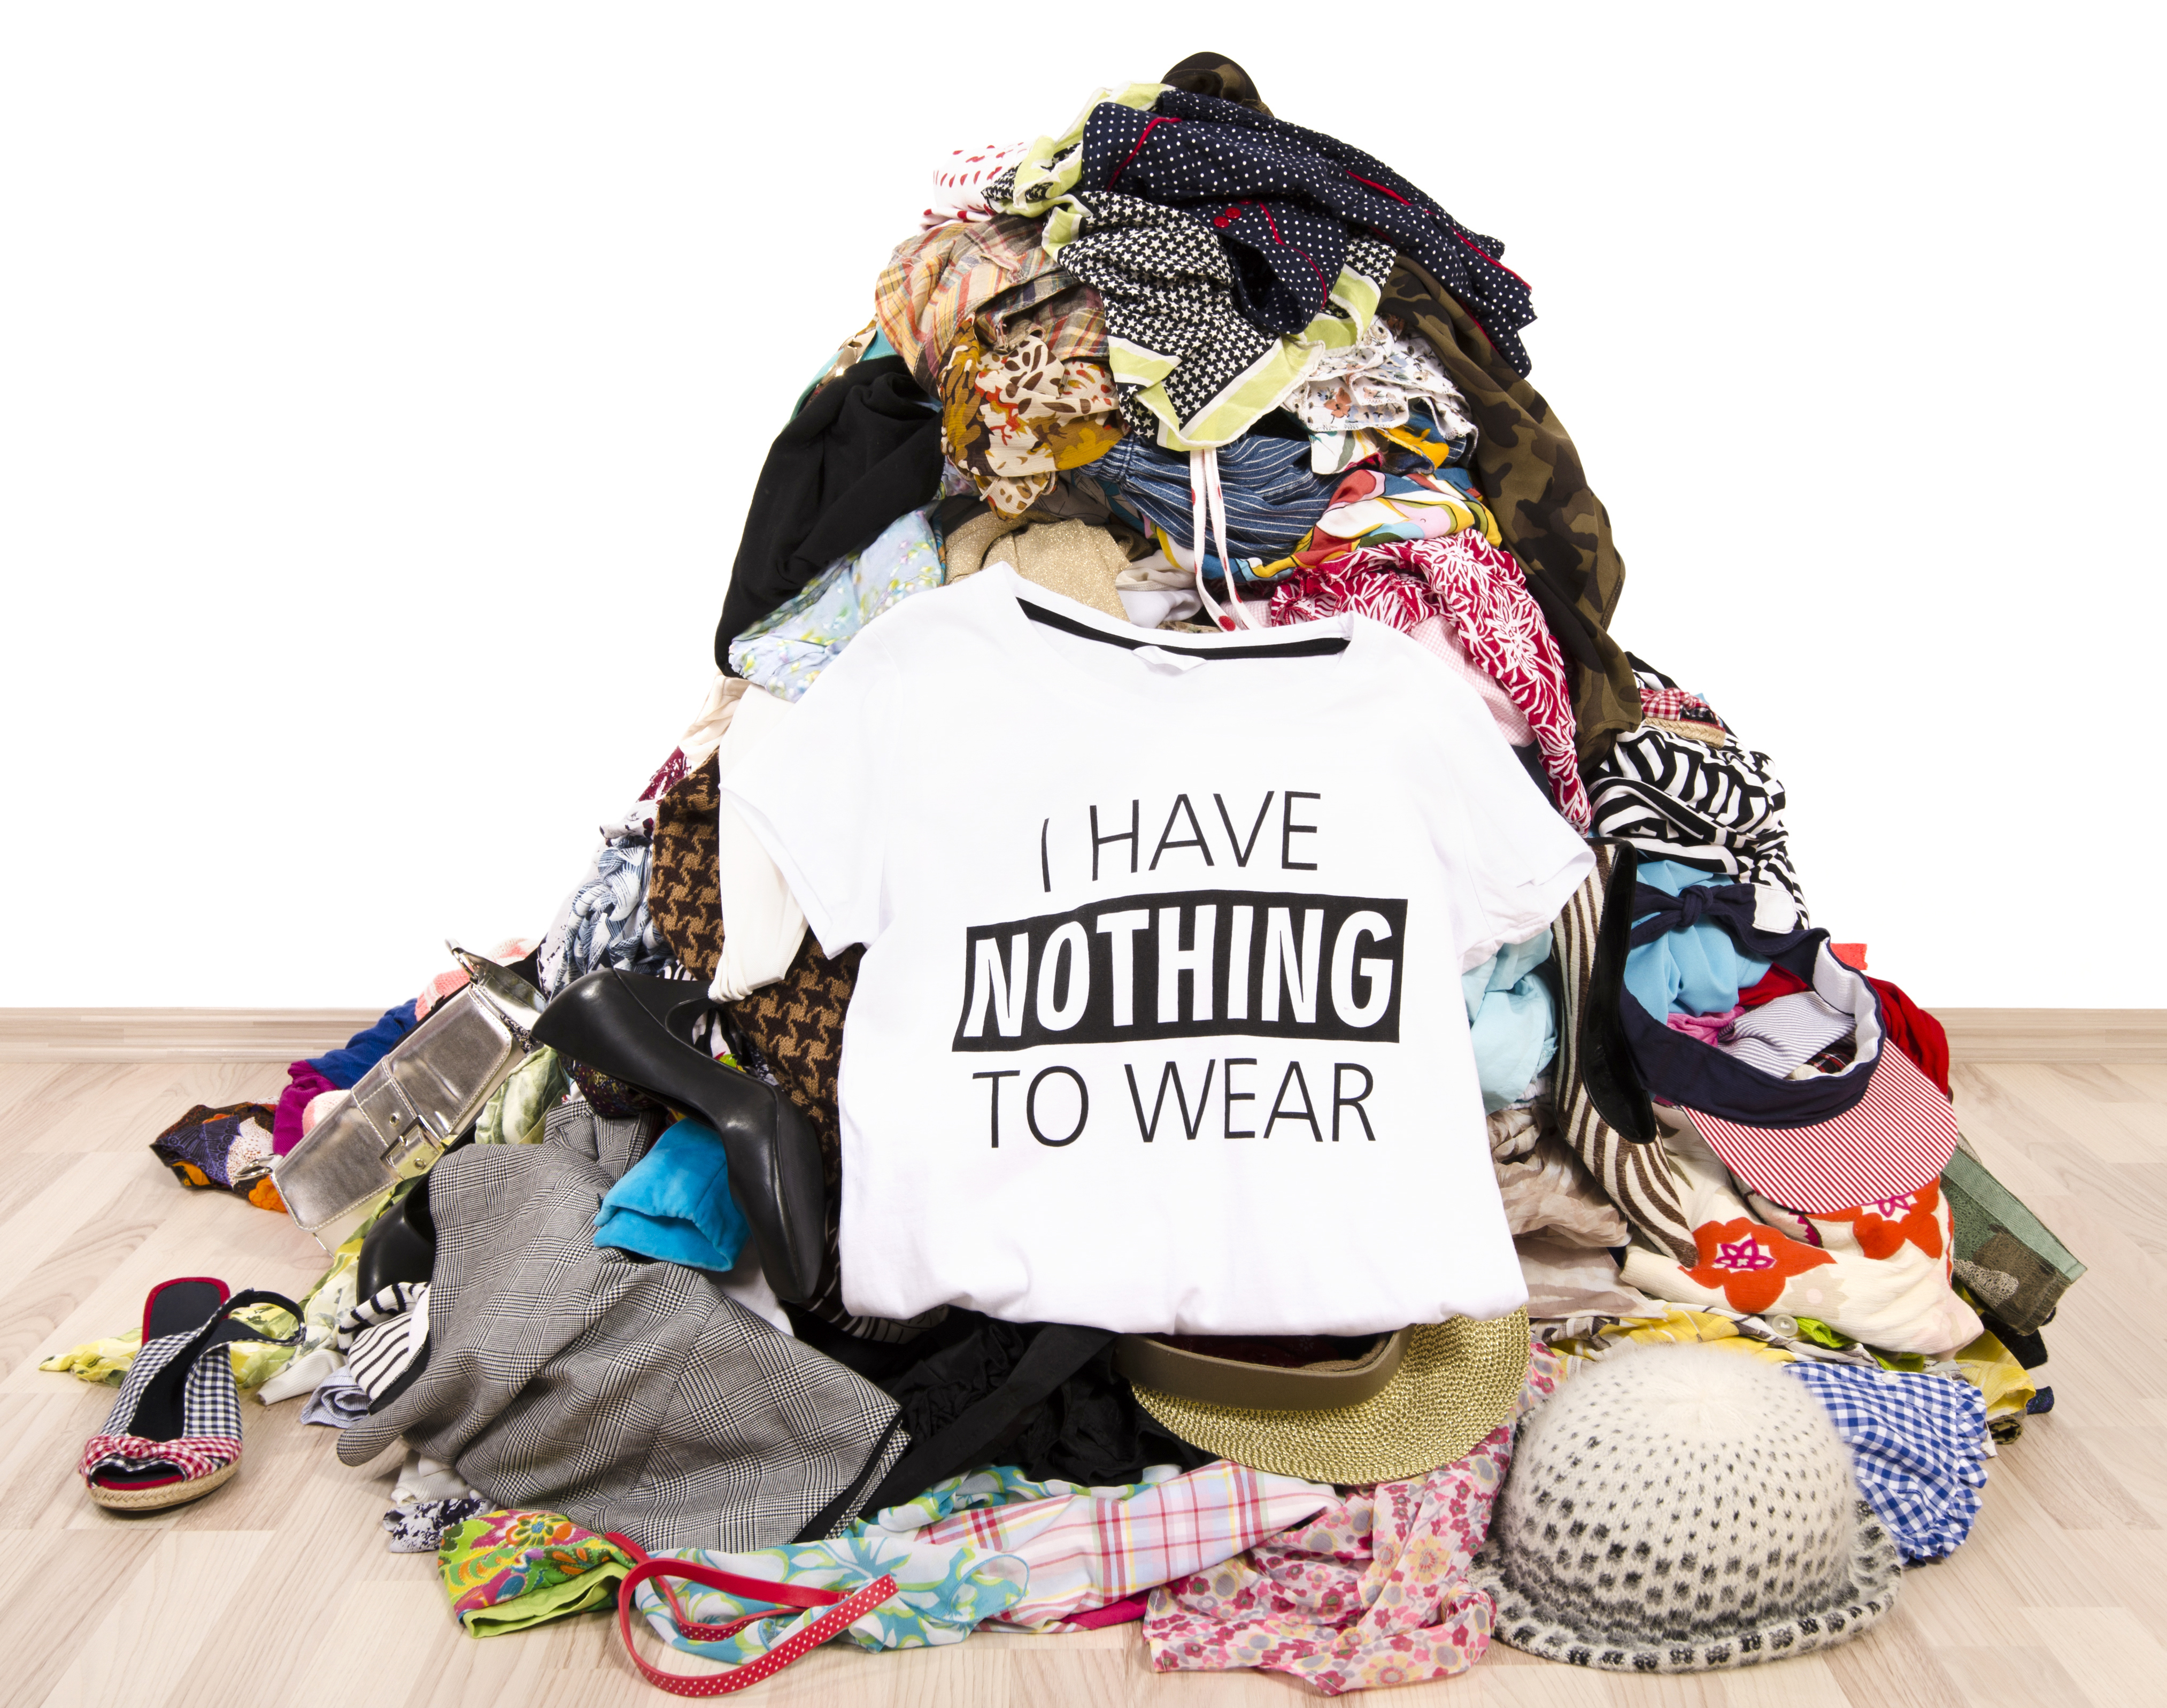 How to solve the "I've got nothing to wear" crisis many women face?